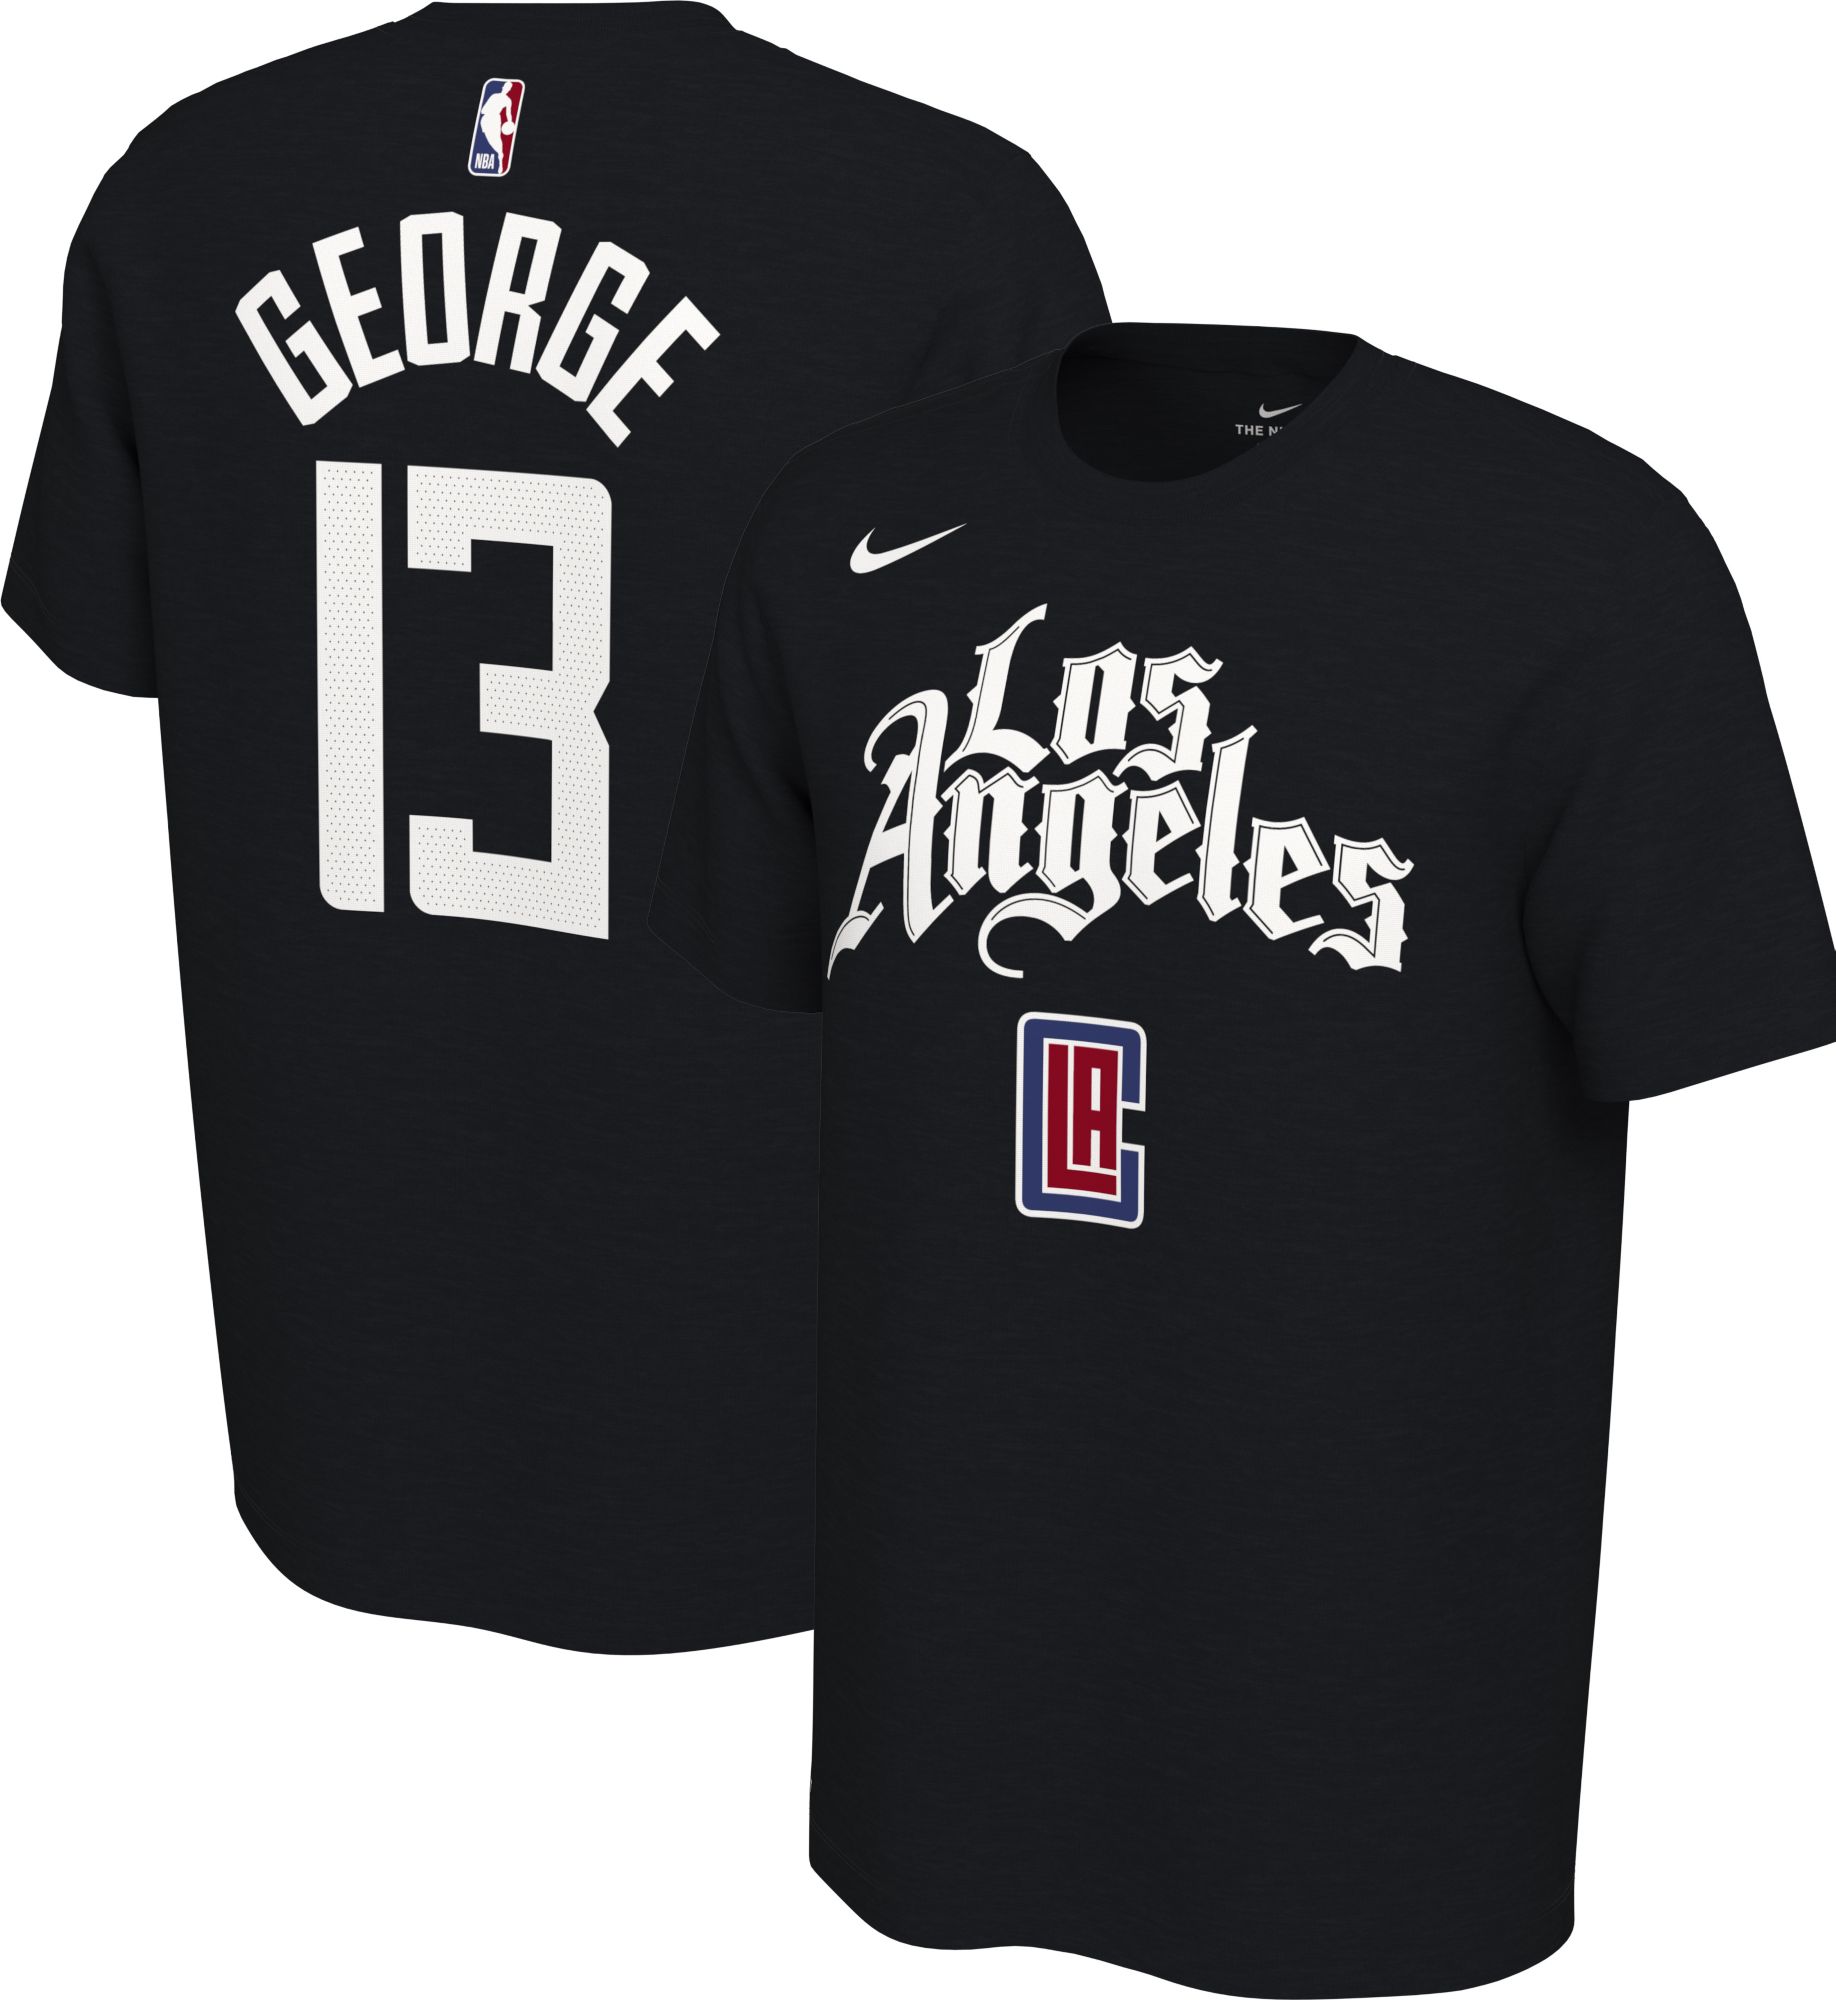 paul george clippers jersey black